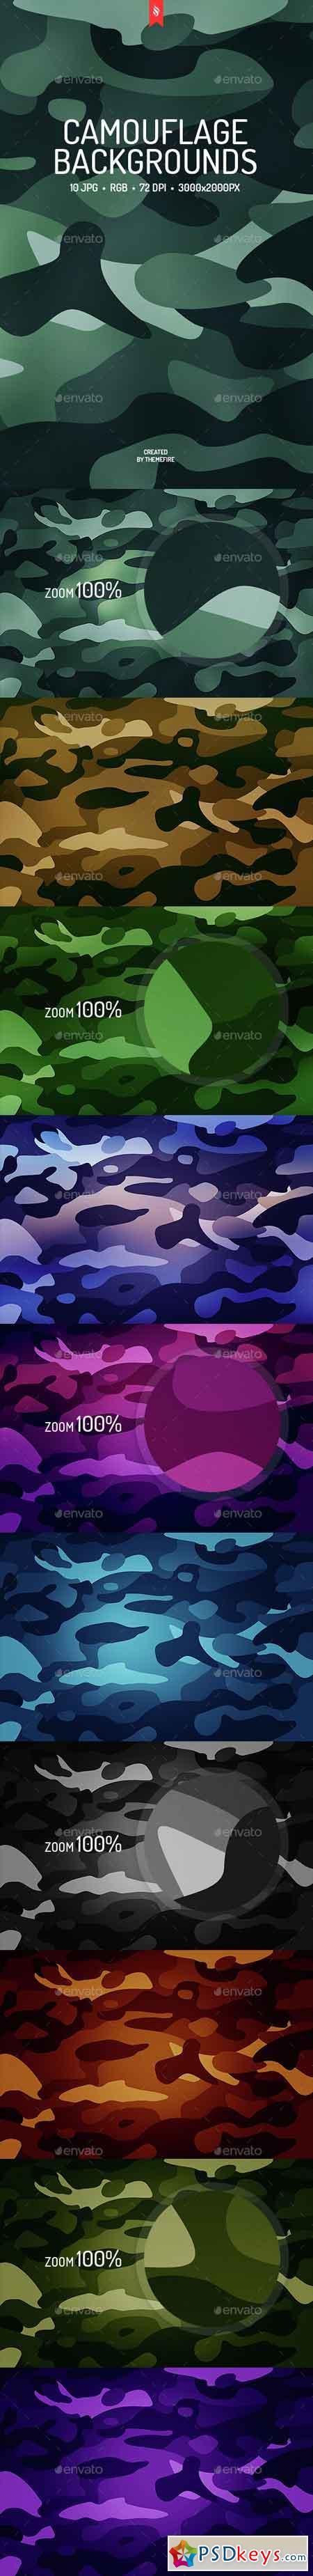 Camouflage Backgrounds 15350161